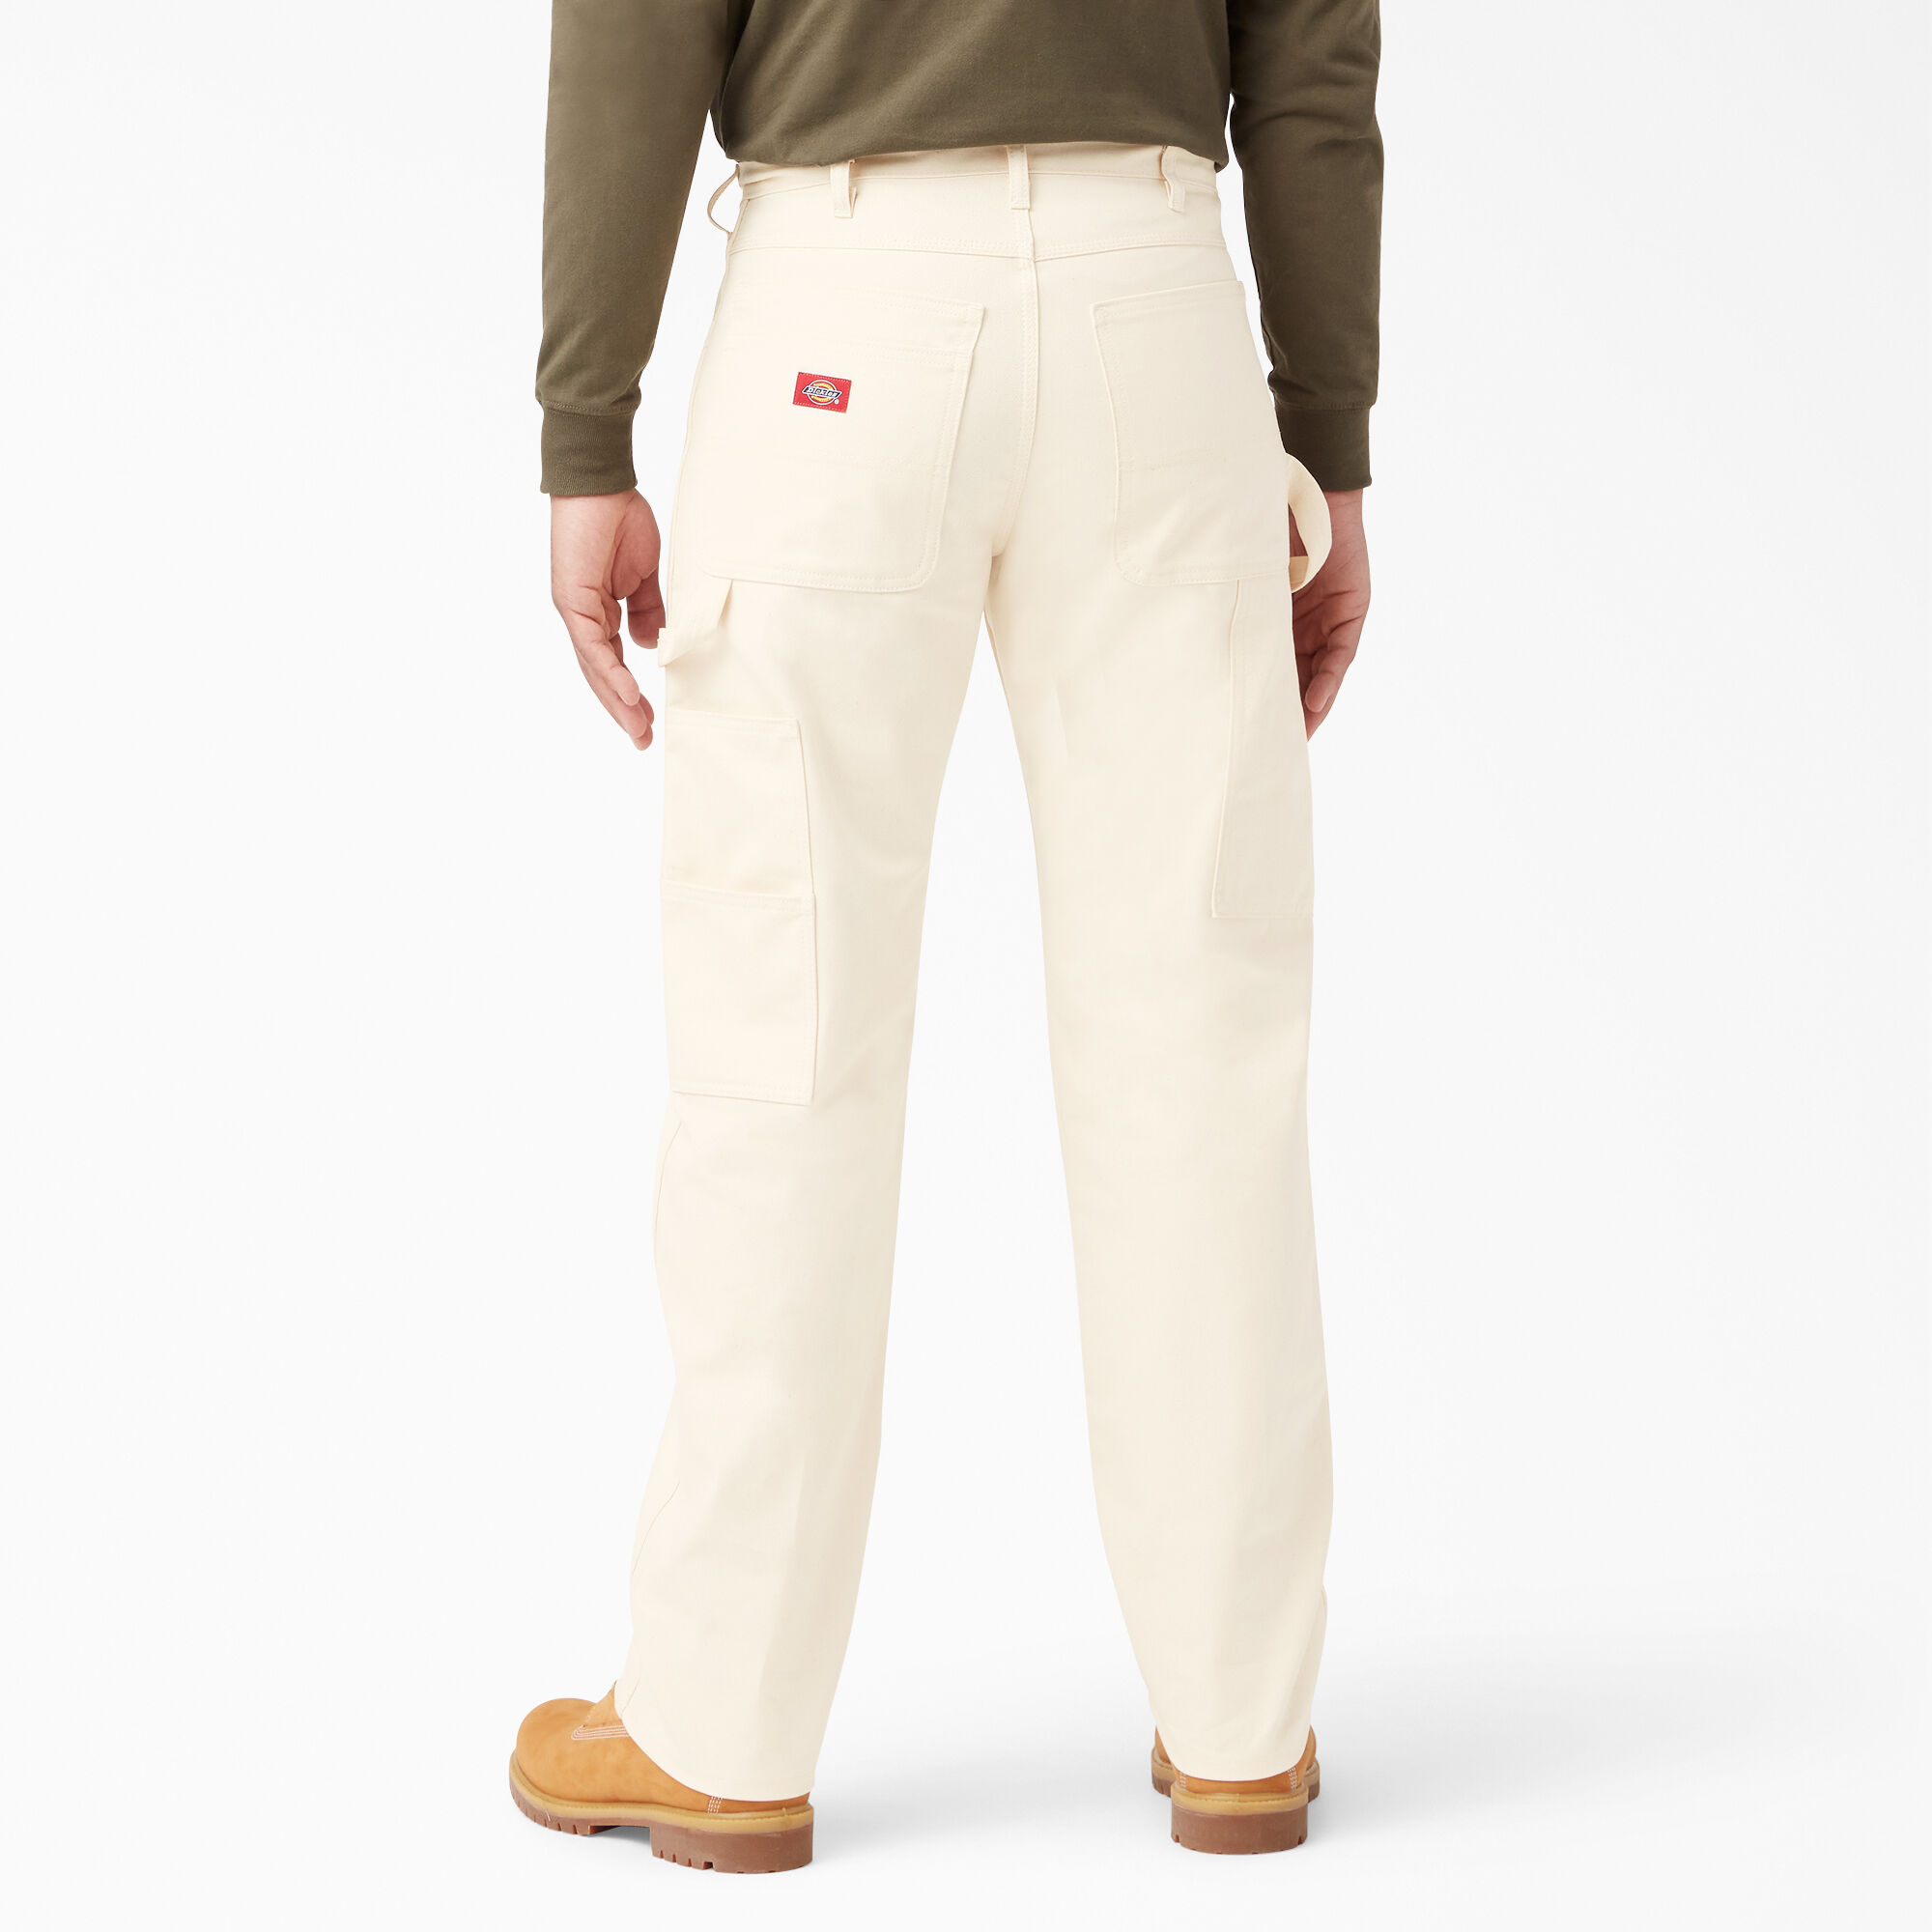 Relaxed Fit Painter's Pants